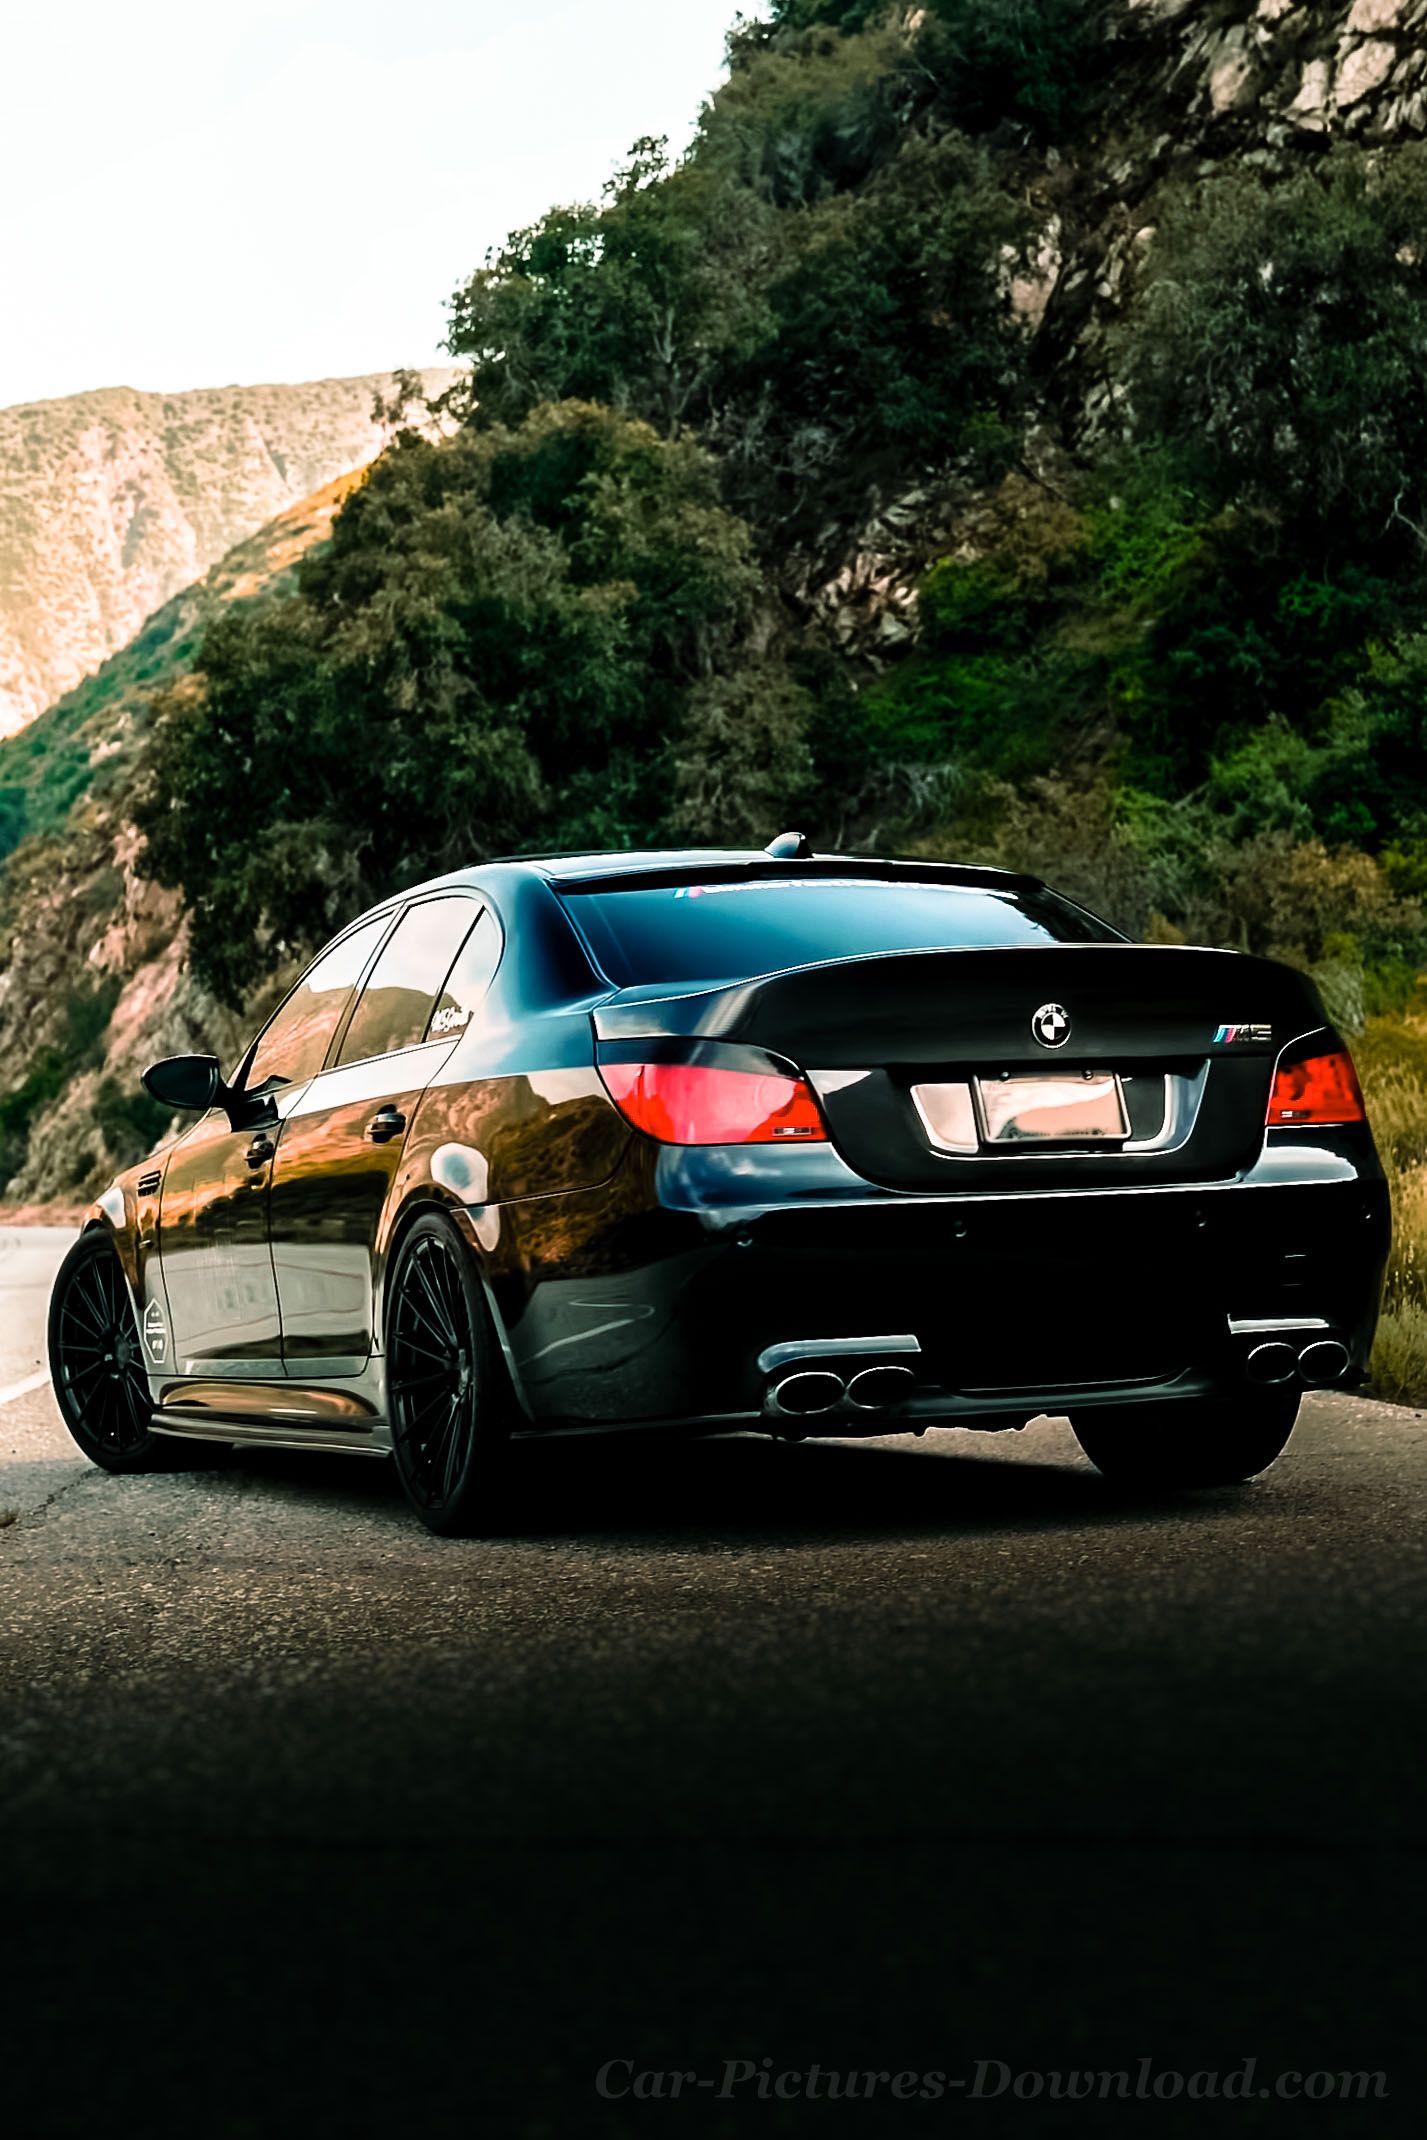 Free download BMW M5 Wallpaper Image PC Mobile Device Picture Download [1427x2140] for your Desktop, Mobile & Tablet. Explore BMW M5 Mobile Wallpaper. BMW M5 Mobile Wallpaper, Bmw M5